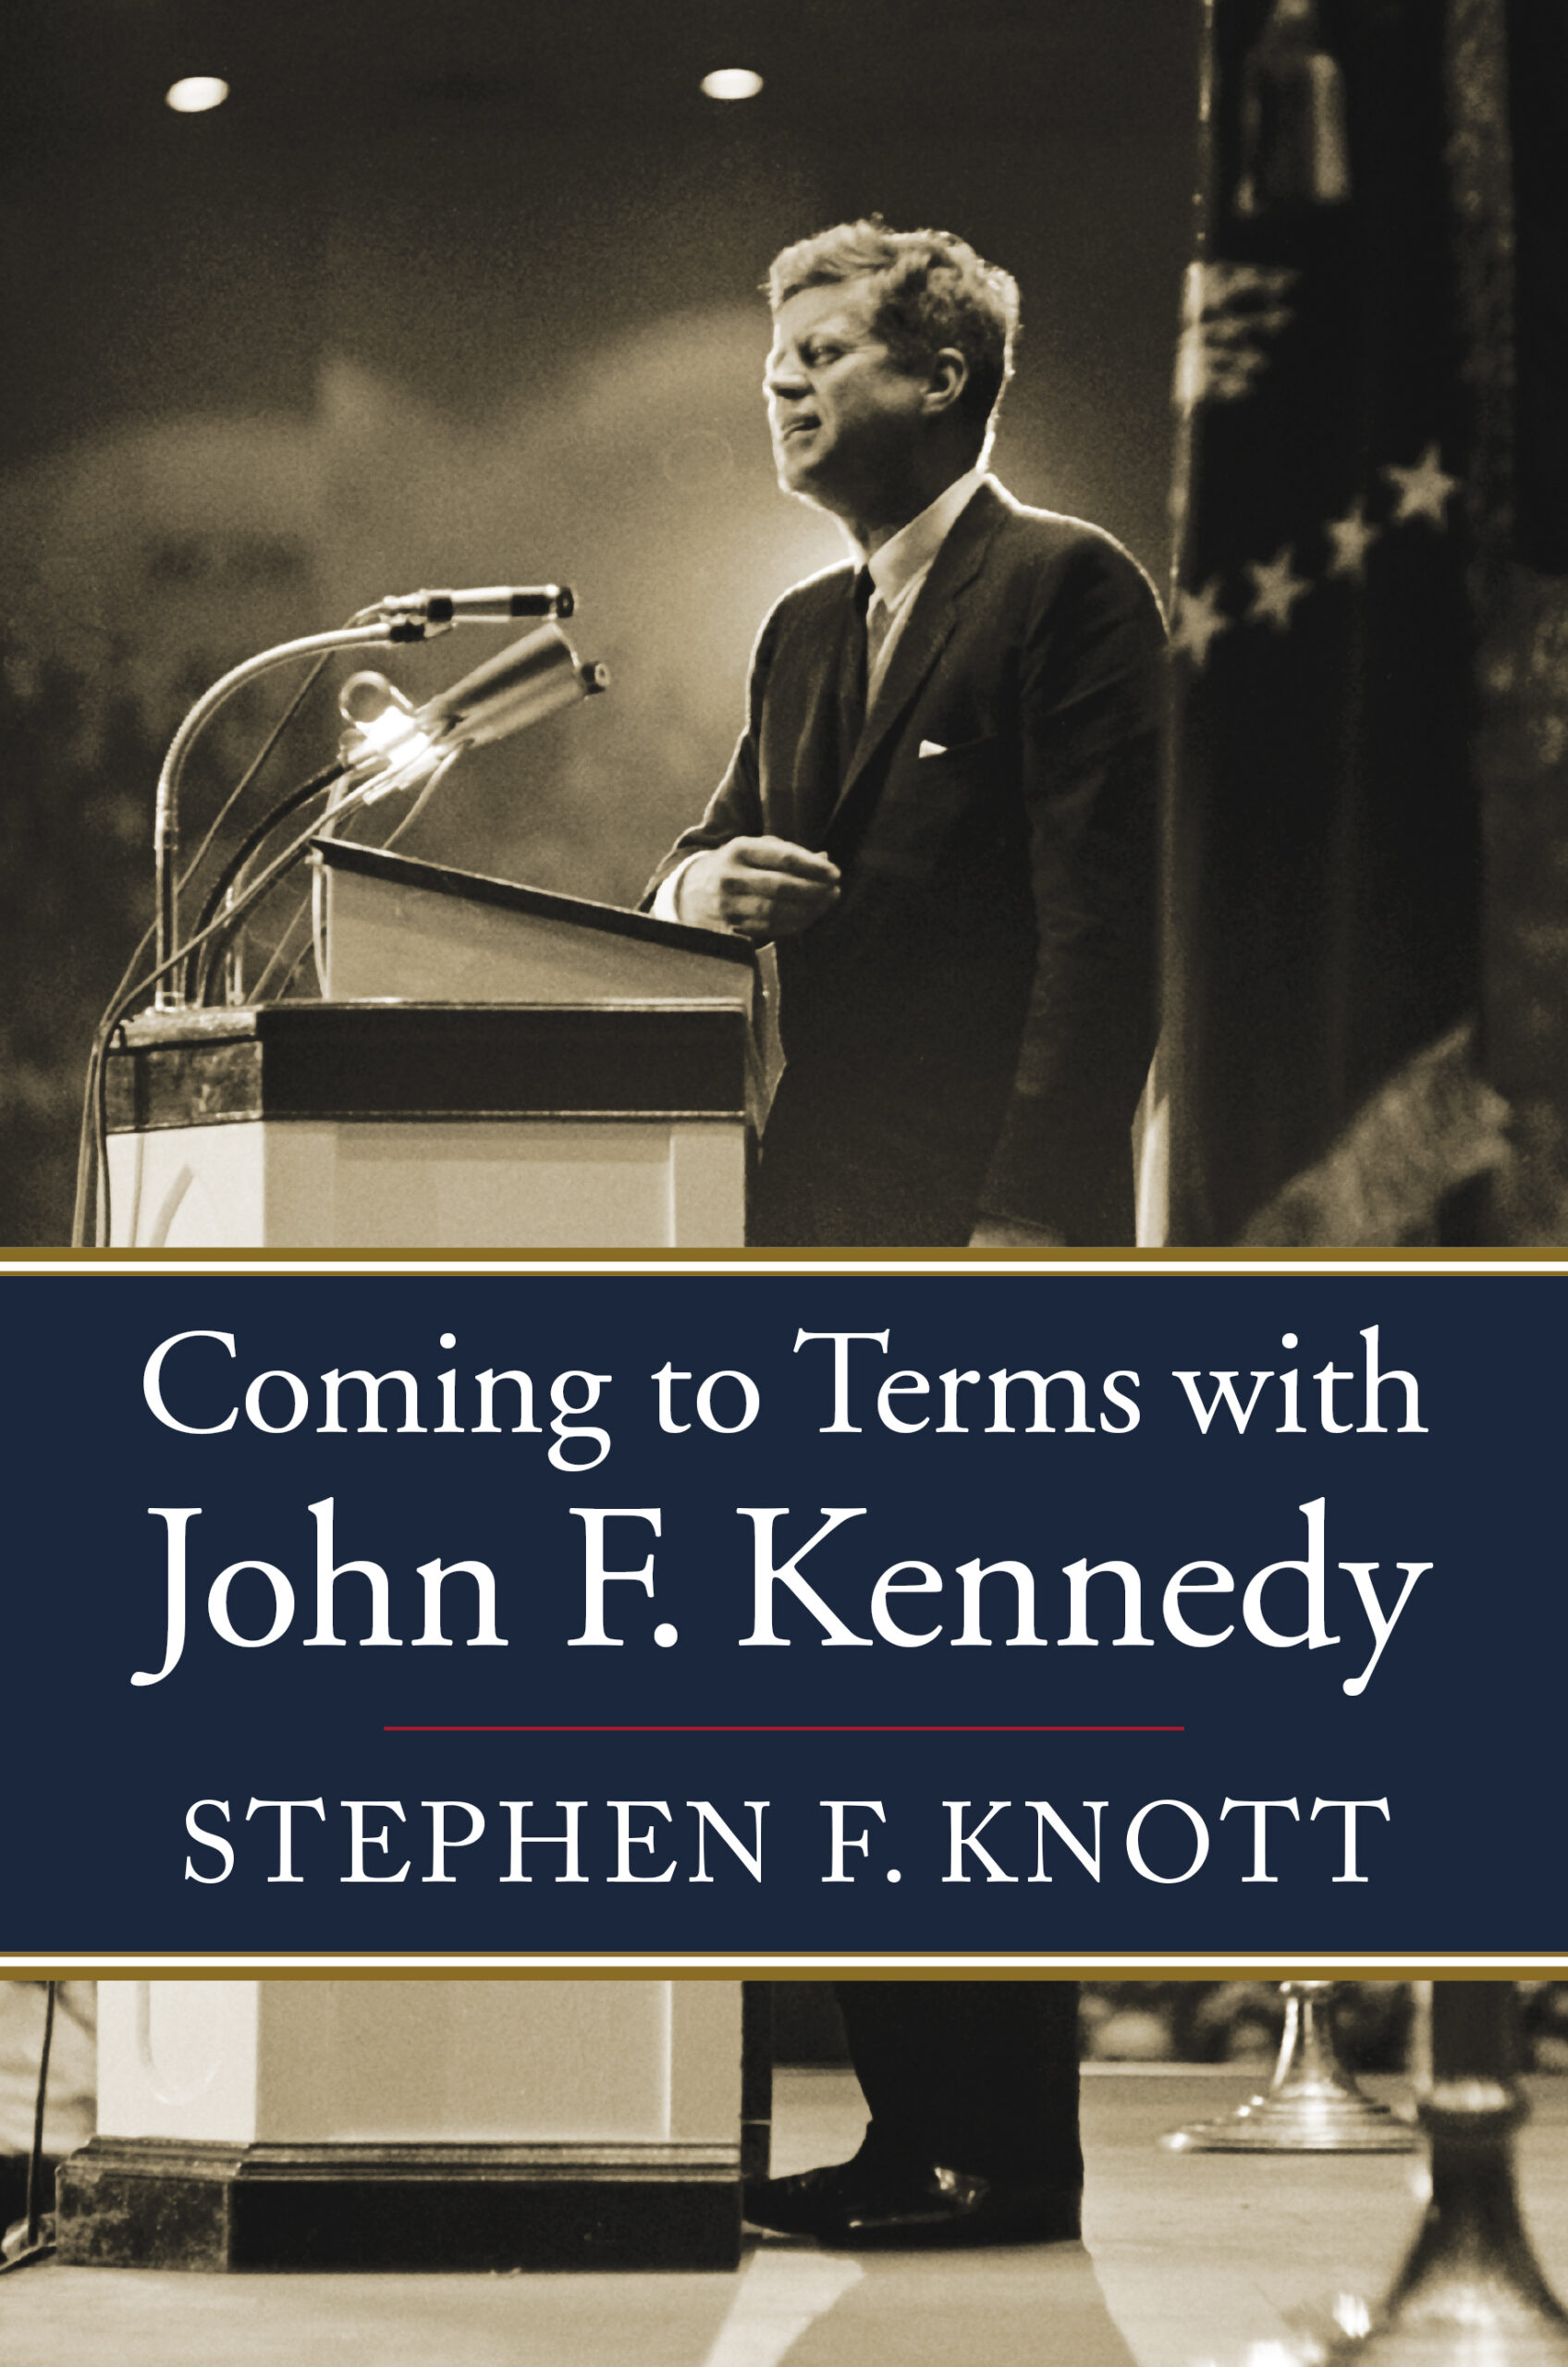 Stephen Knott, "Coming to Terms with John F. Kennedy"